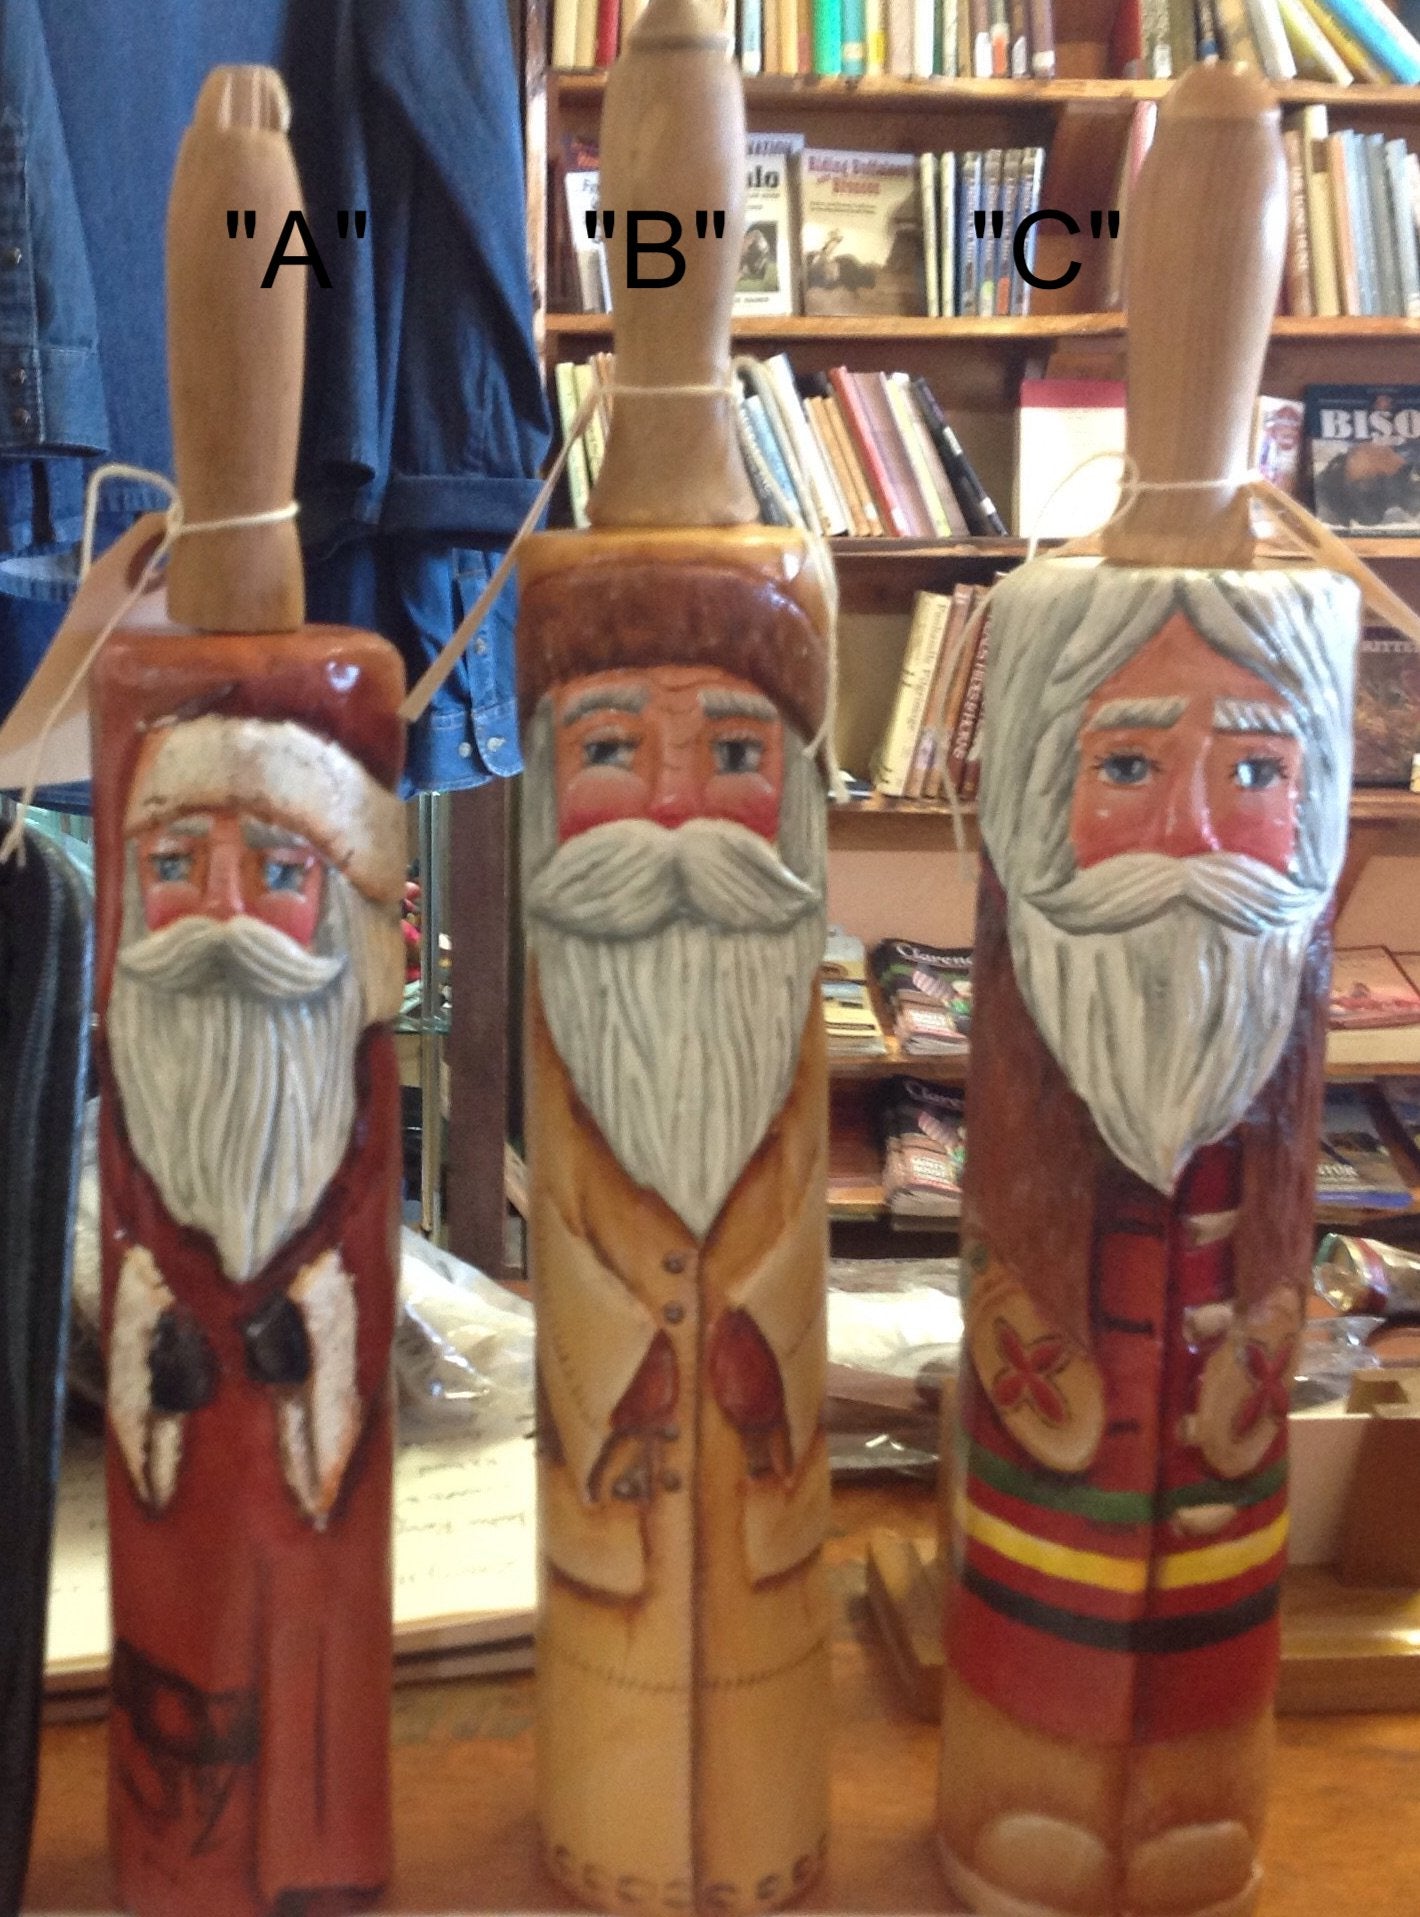 Buffalo Themed Santas ... Hand Carved Antique Rolling Pins from the Santa Smith Sisters of Amarillo, Texas